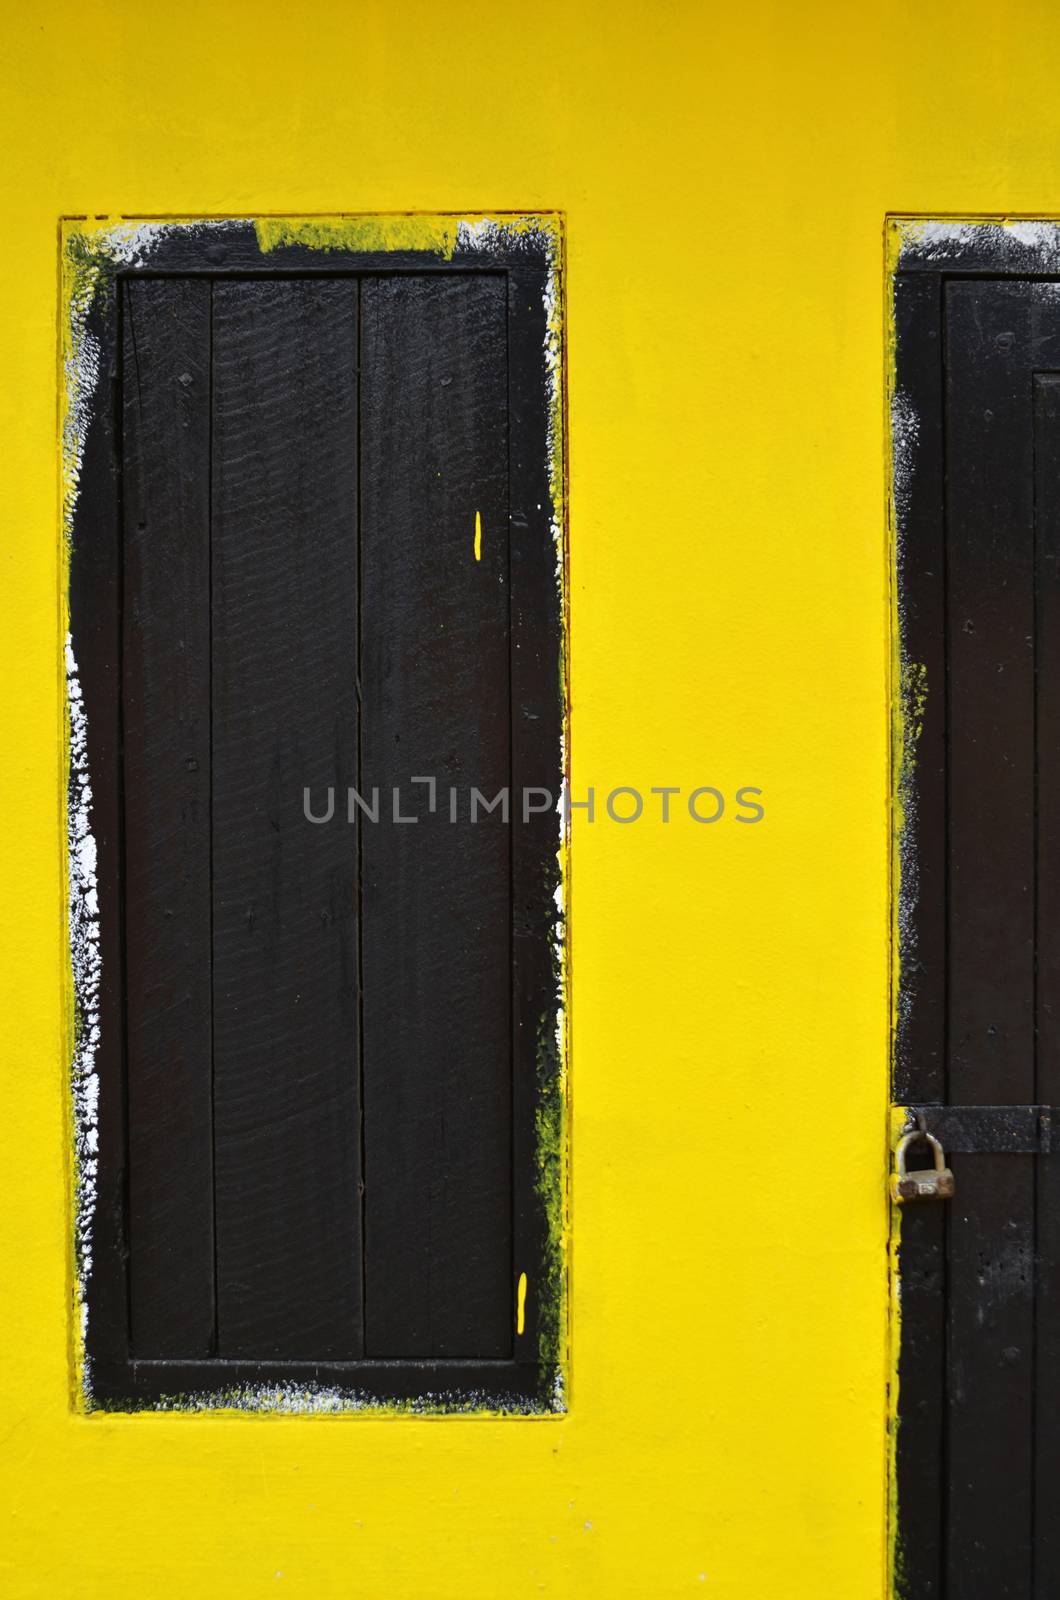 Wooden window with yellow wall